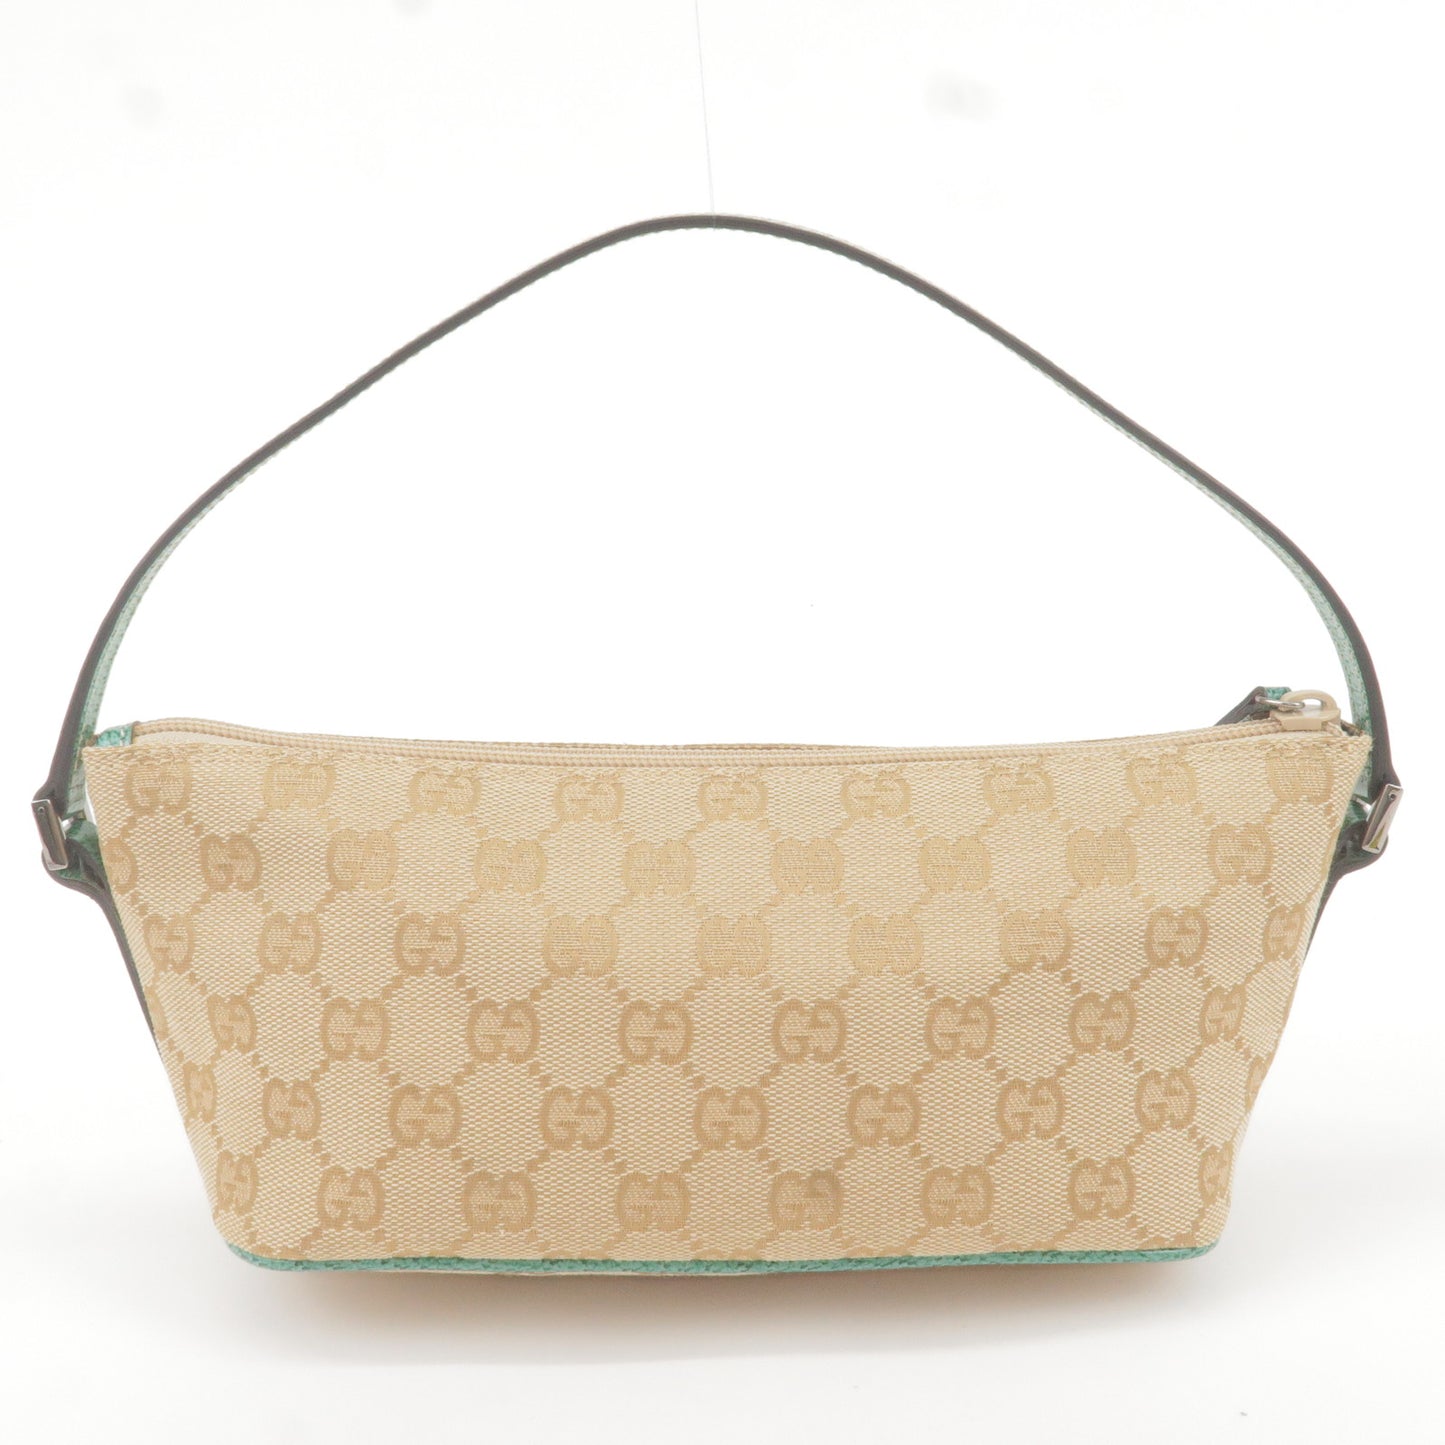 GUCCI Boat Bag GG Canvas Leather Hand Bag Beige 07198